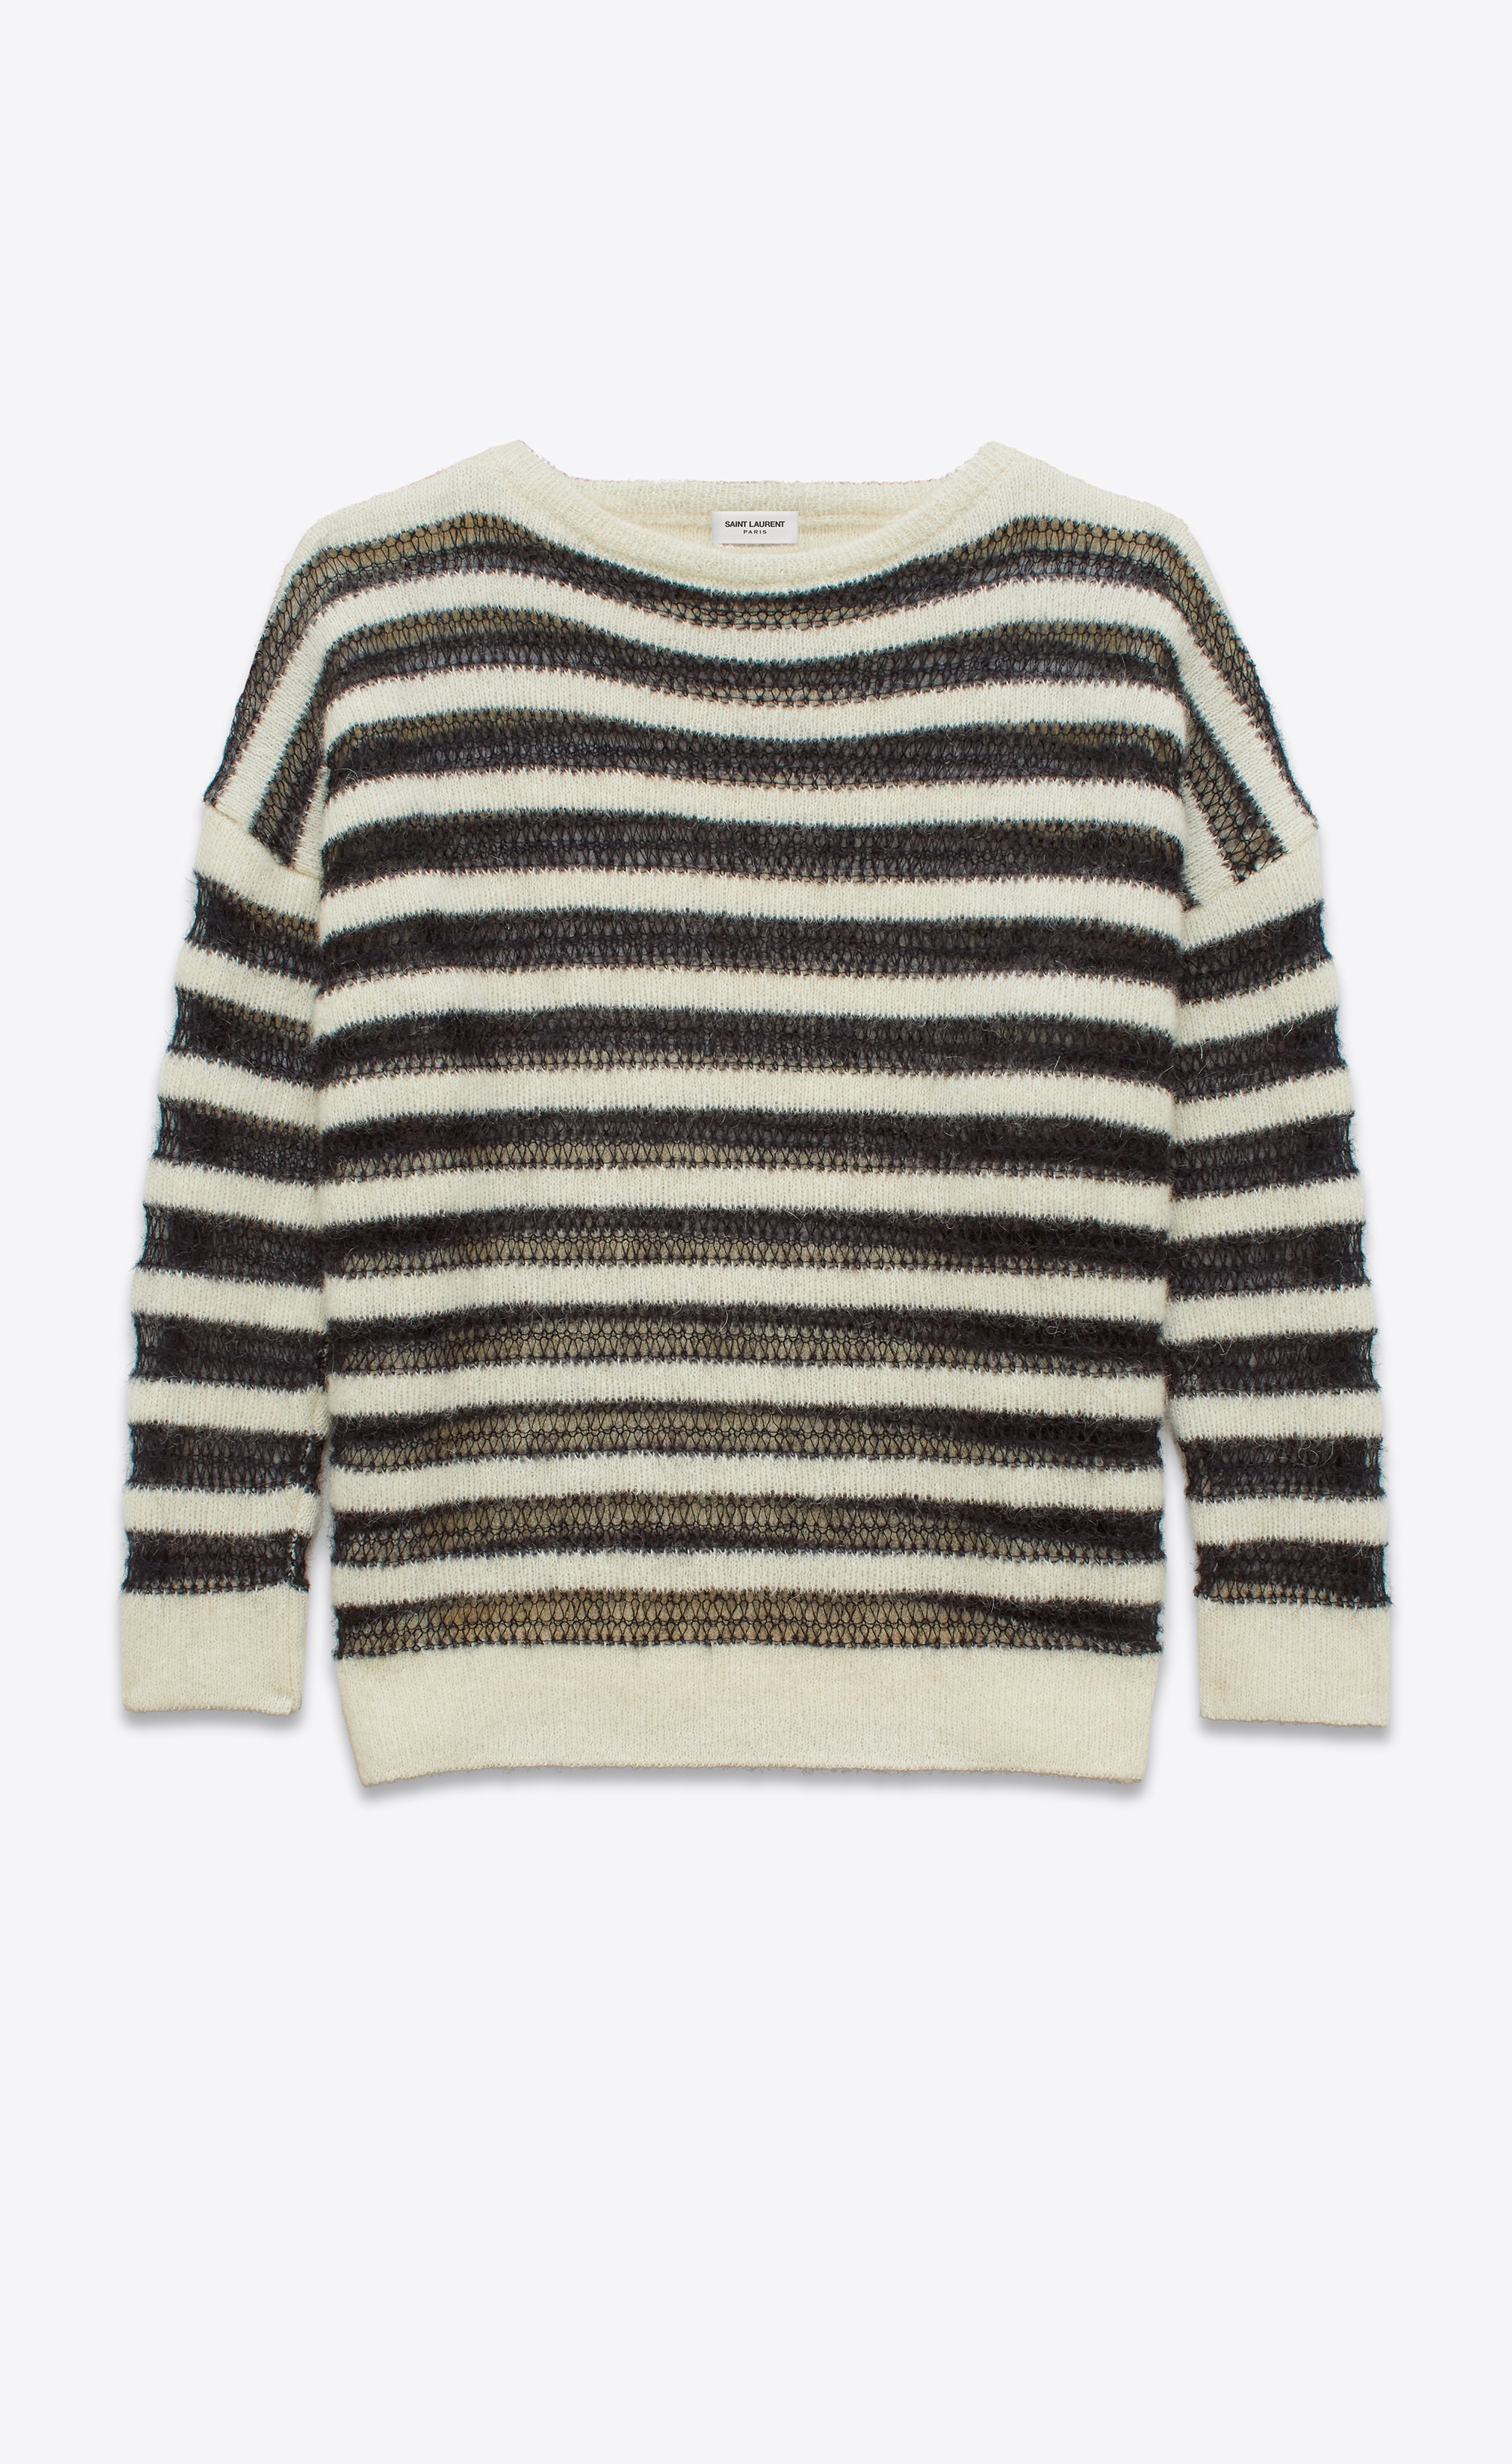 Saint Laurent Bateau Neckline Sweater In Ivory And Black Striped Mohair ...